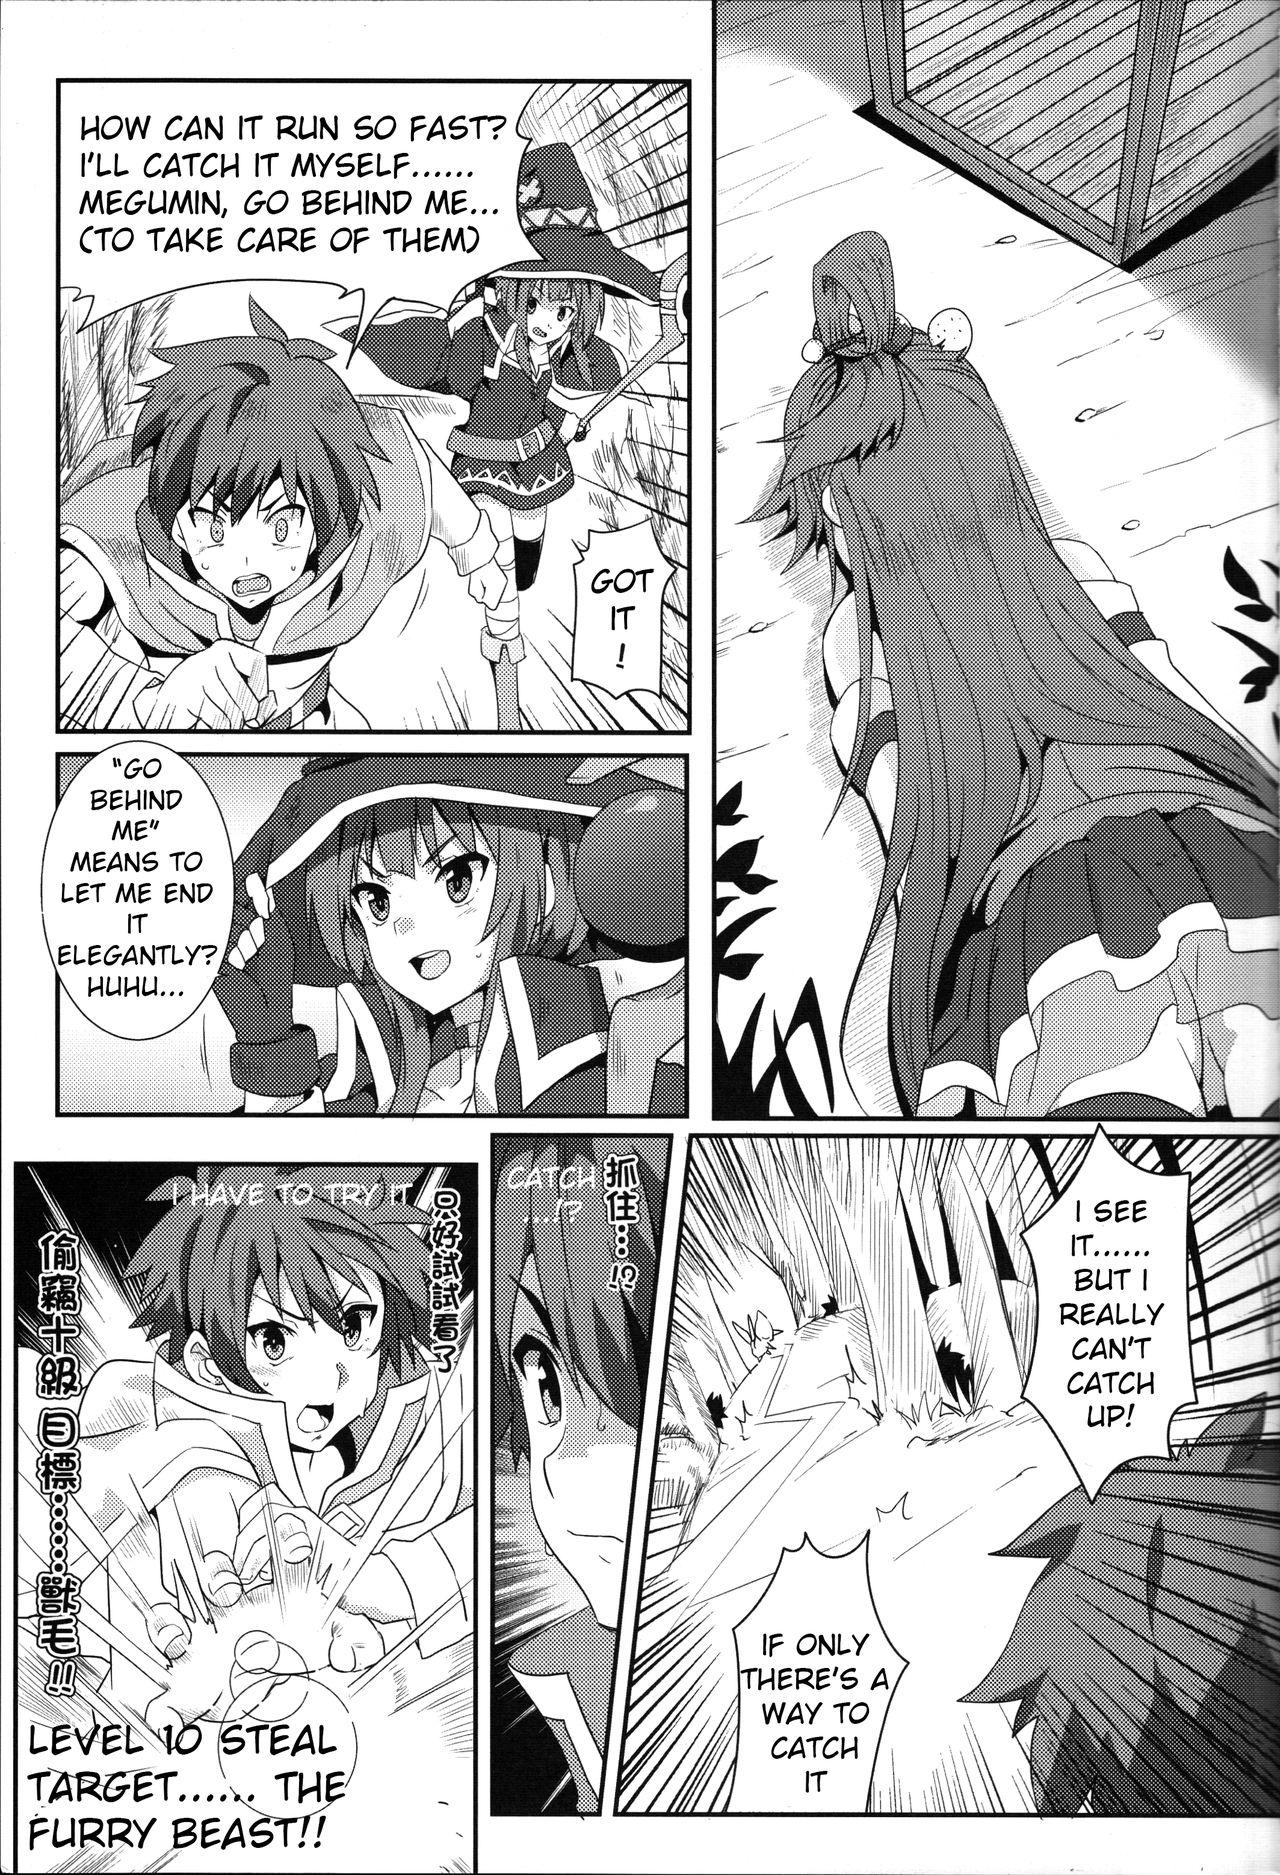 Blessing Megumin with a Magnificence Explosion! 5